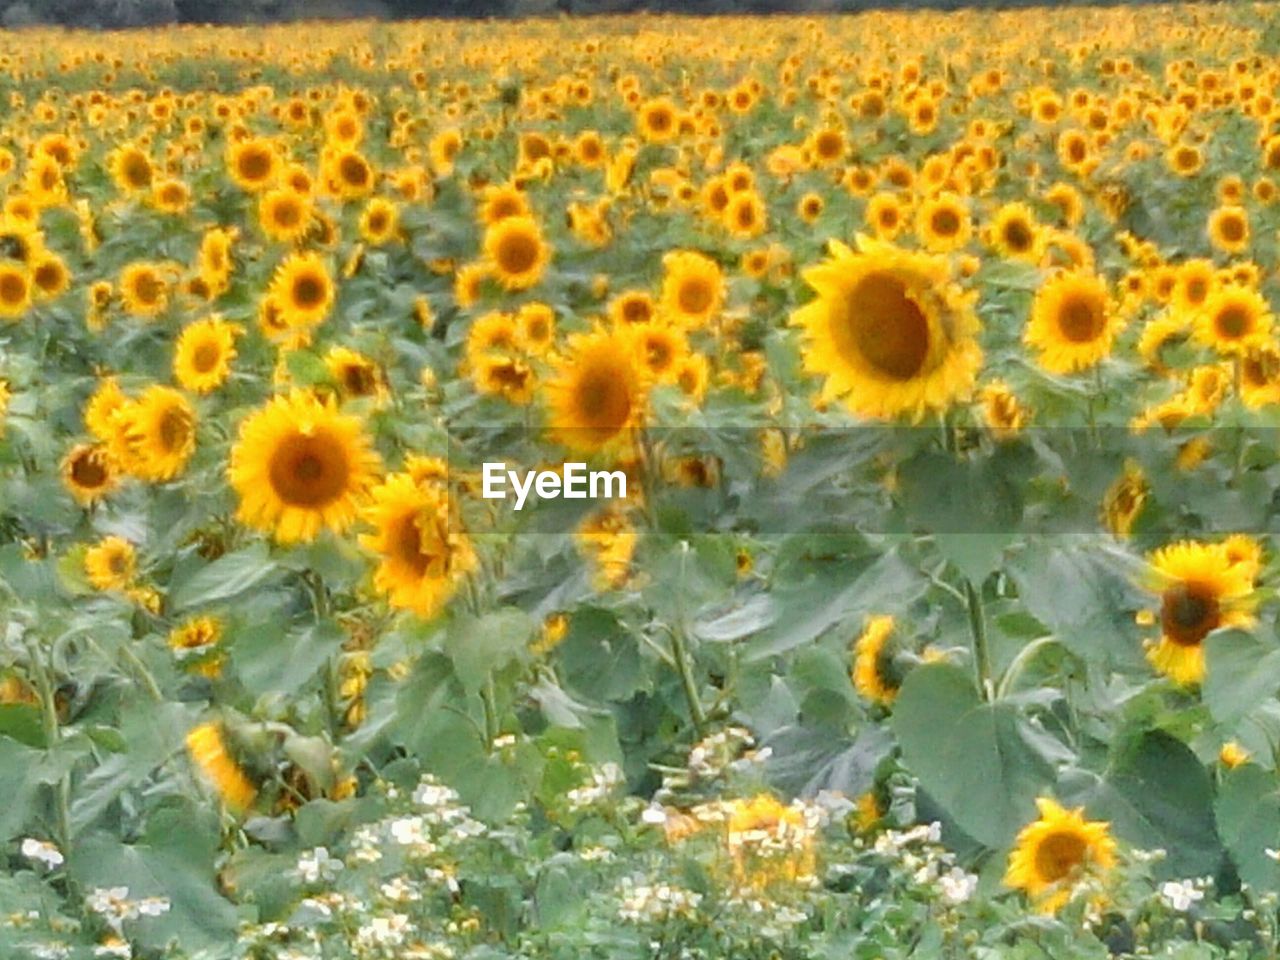 SUNFLOWERS BLOOMING OUTDOORS